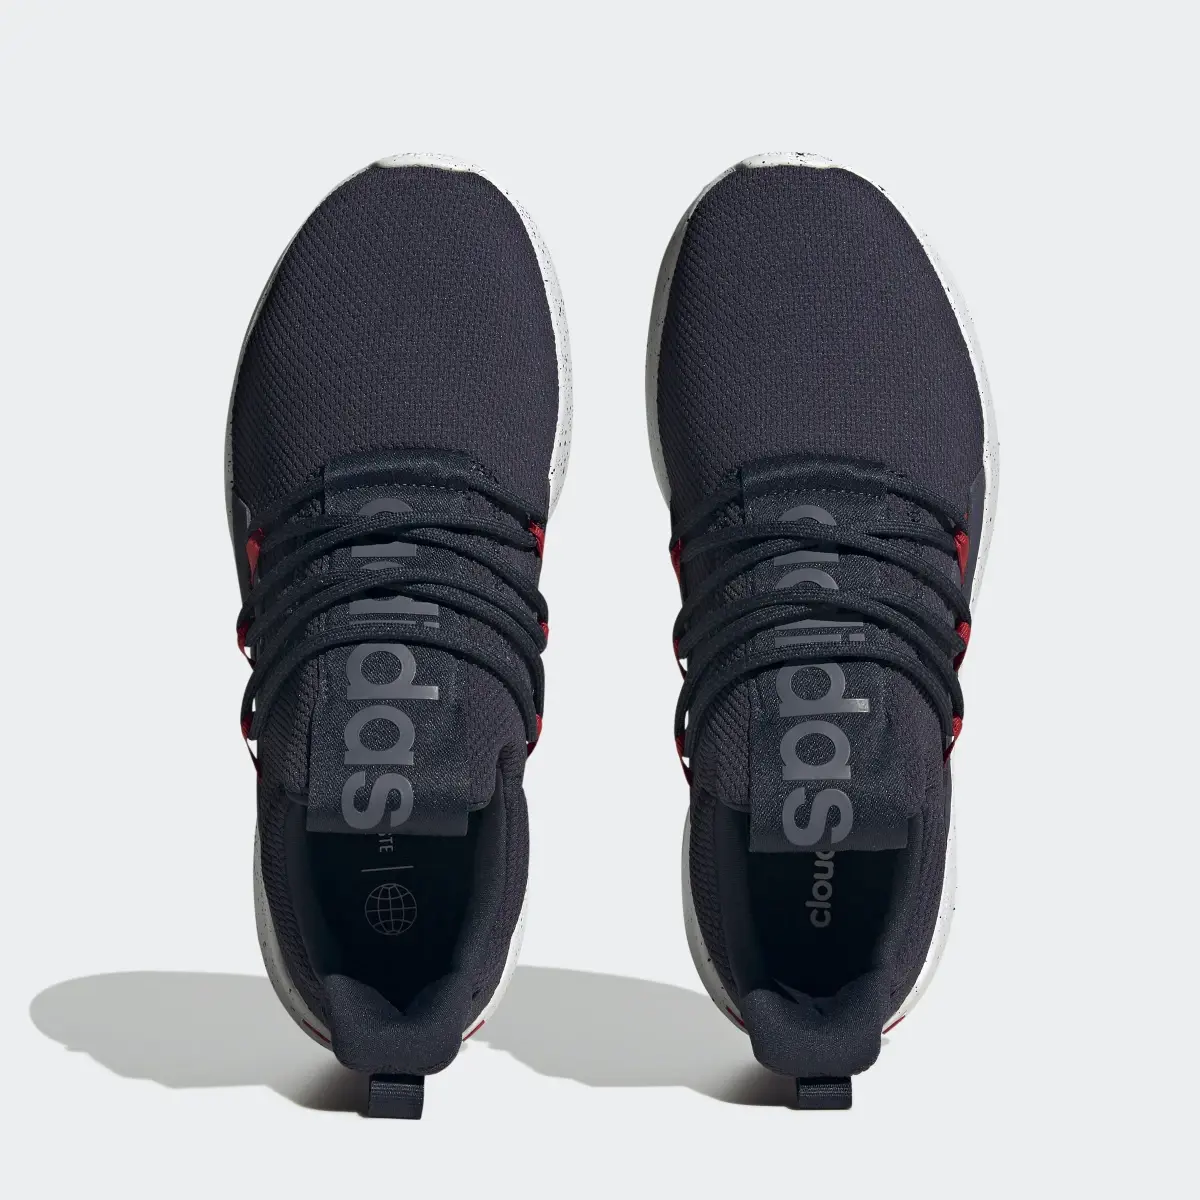 Adidas Lite Racer Adapt 5.0 Shoes. 3